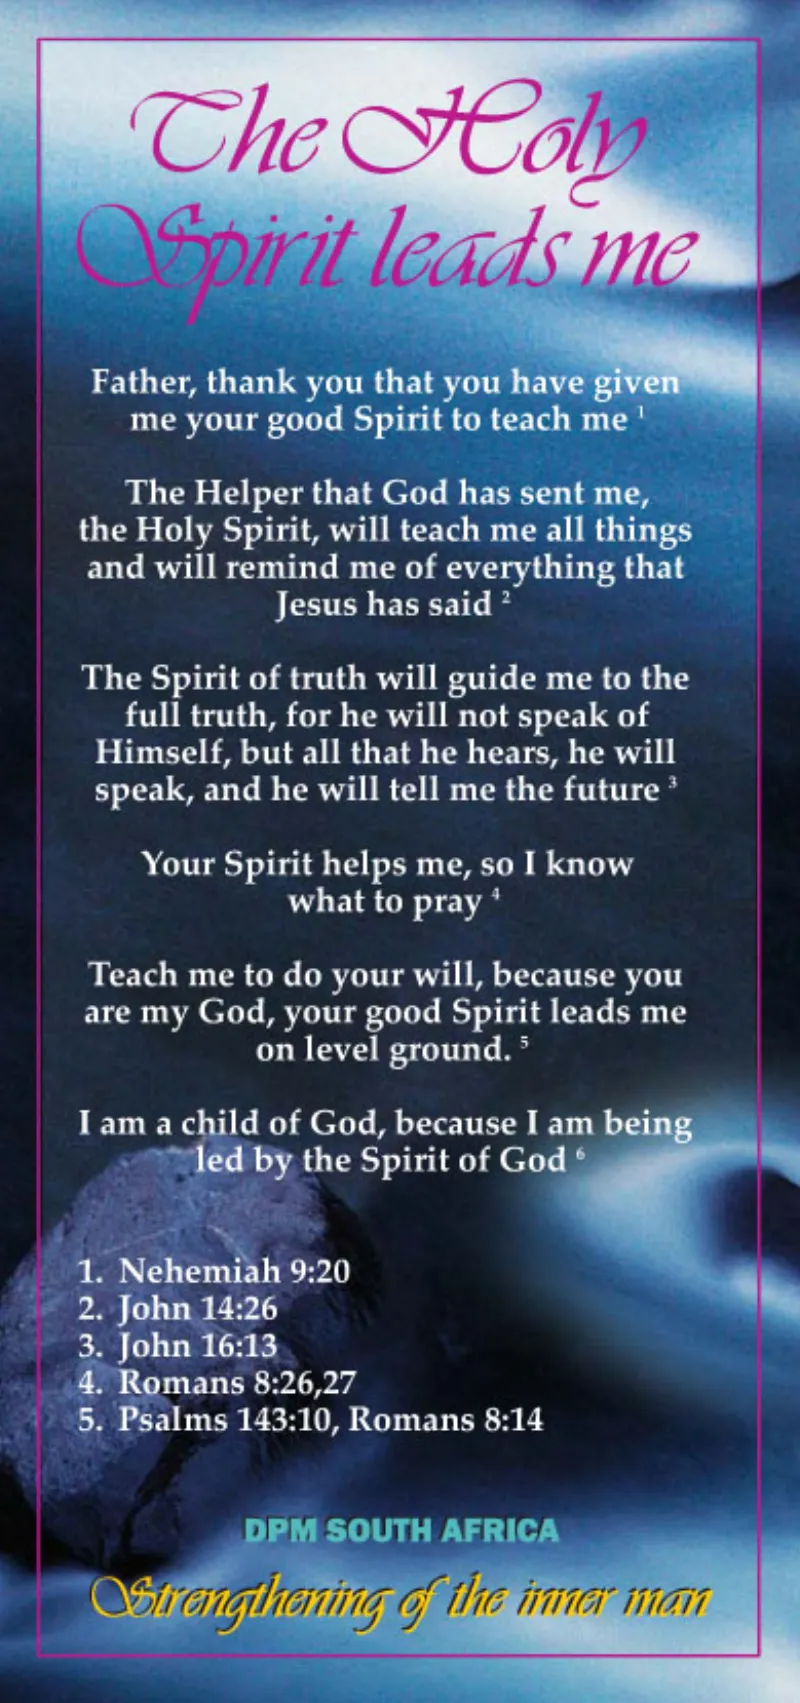 Proclamation - The Holy Spirit leads me